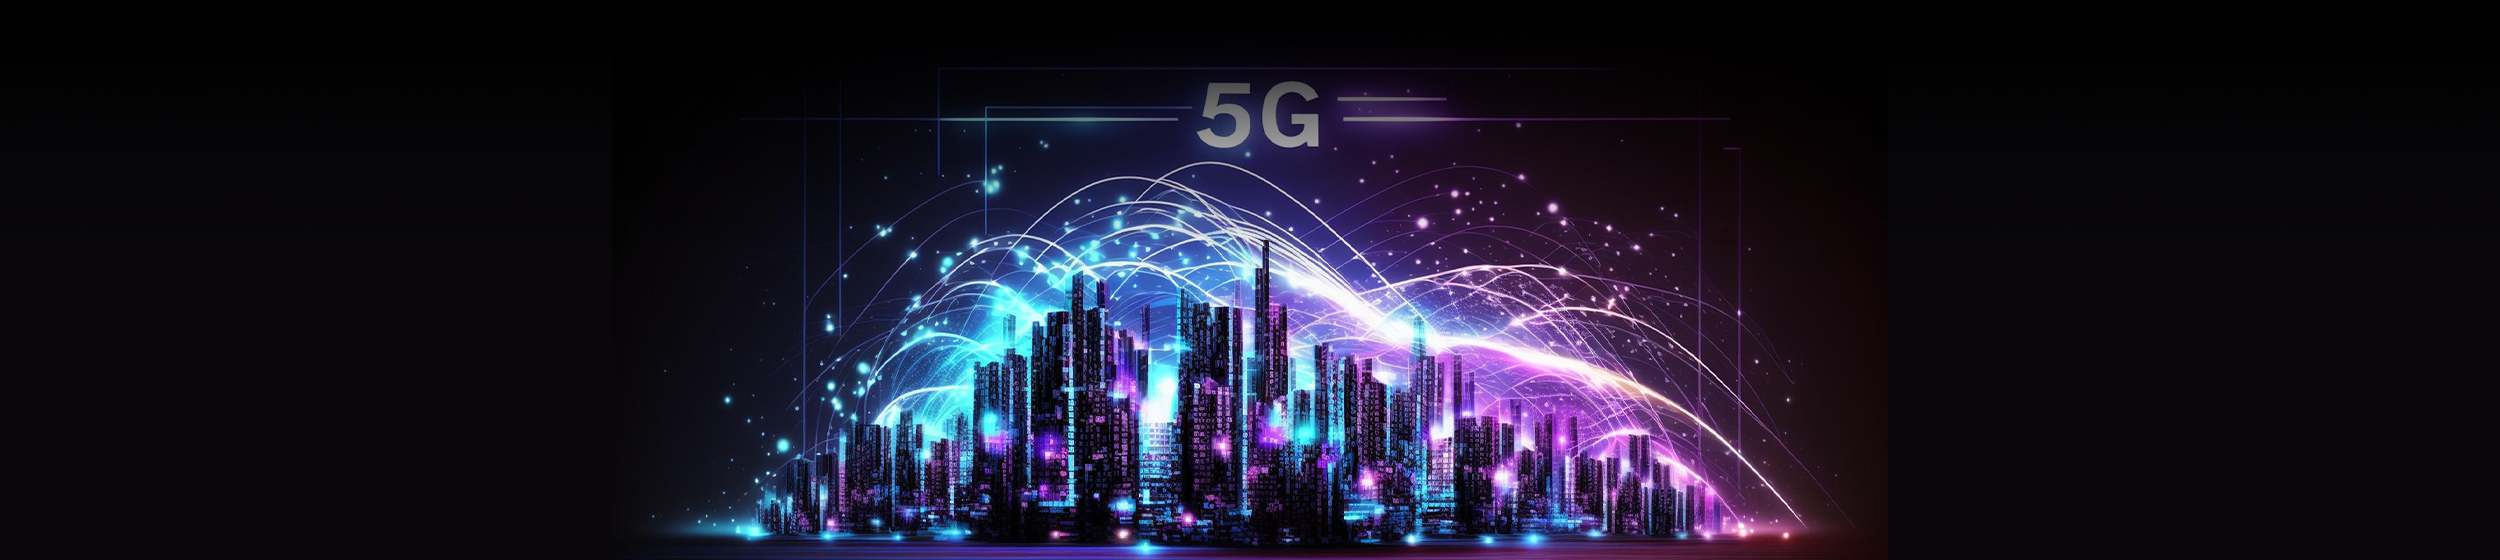 Banner-Nephio: The Open-Source Project that is Changing the Way 5G Networks are Built and Managed